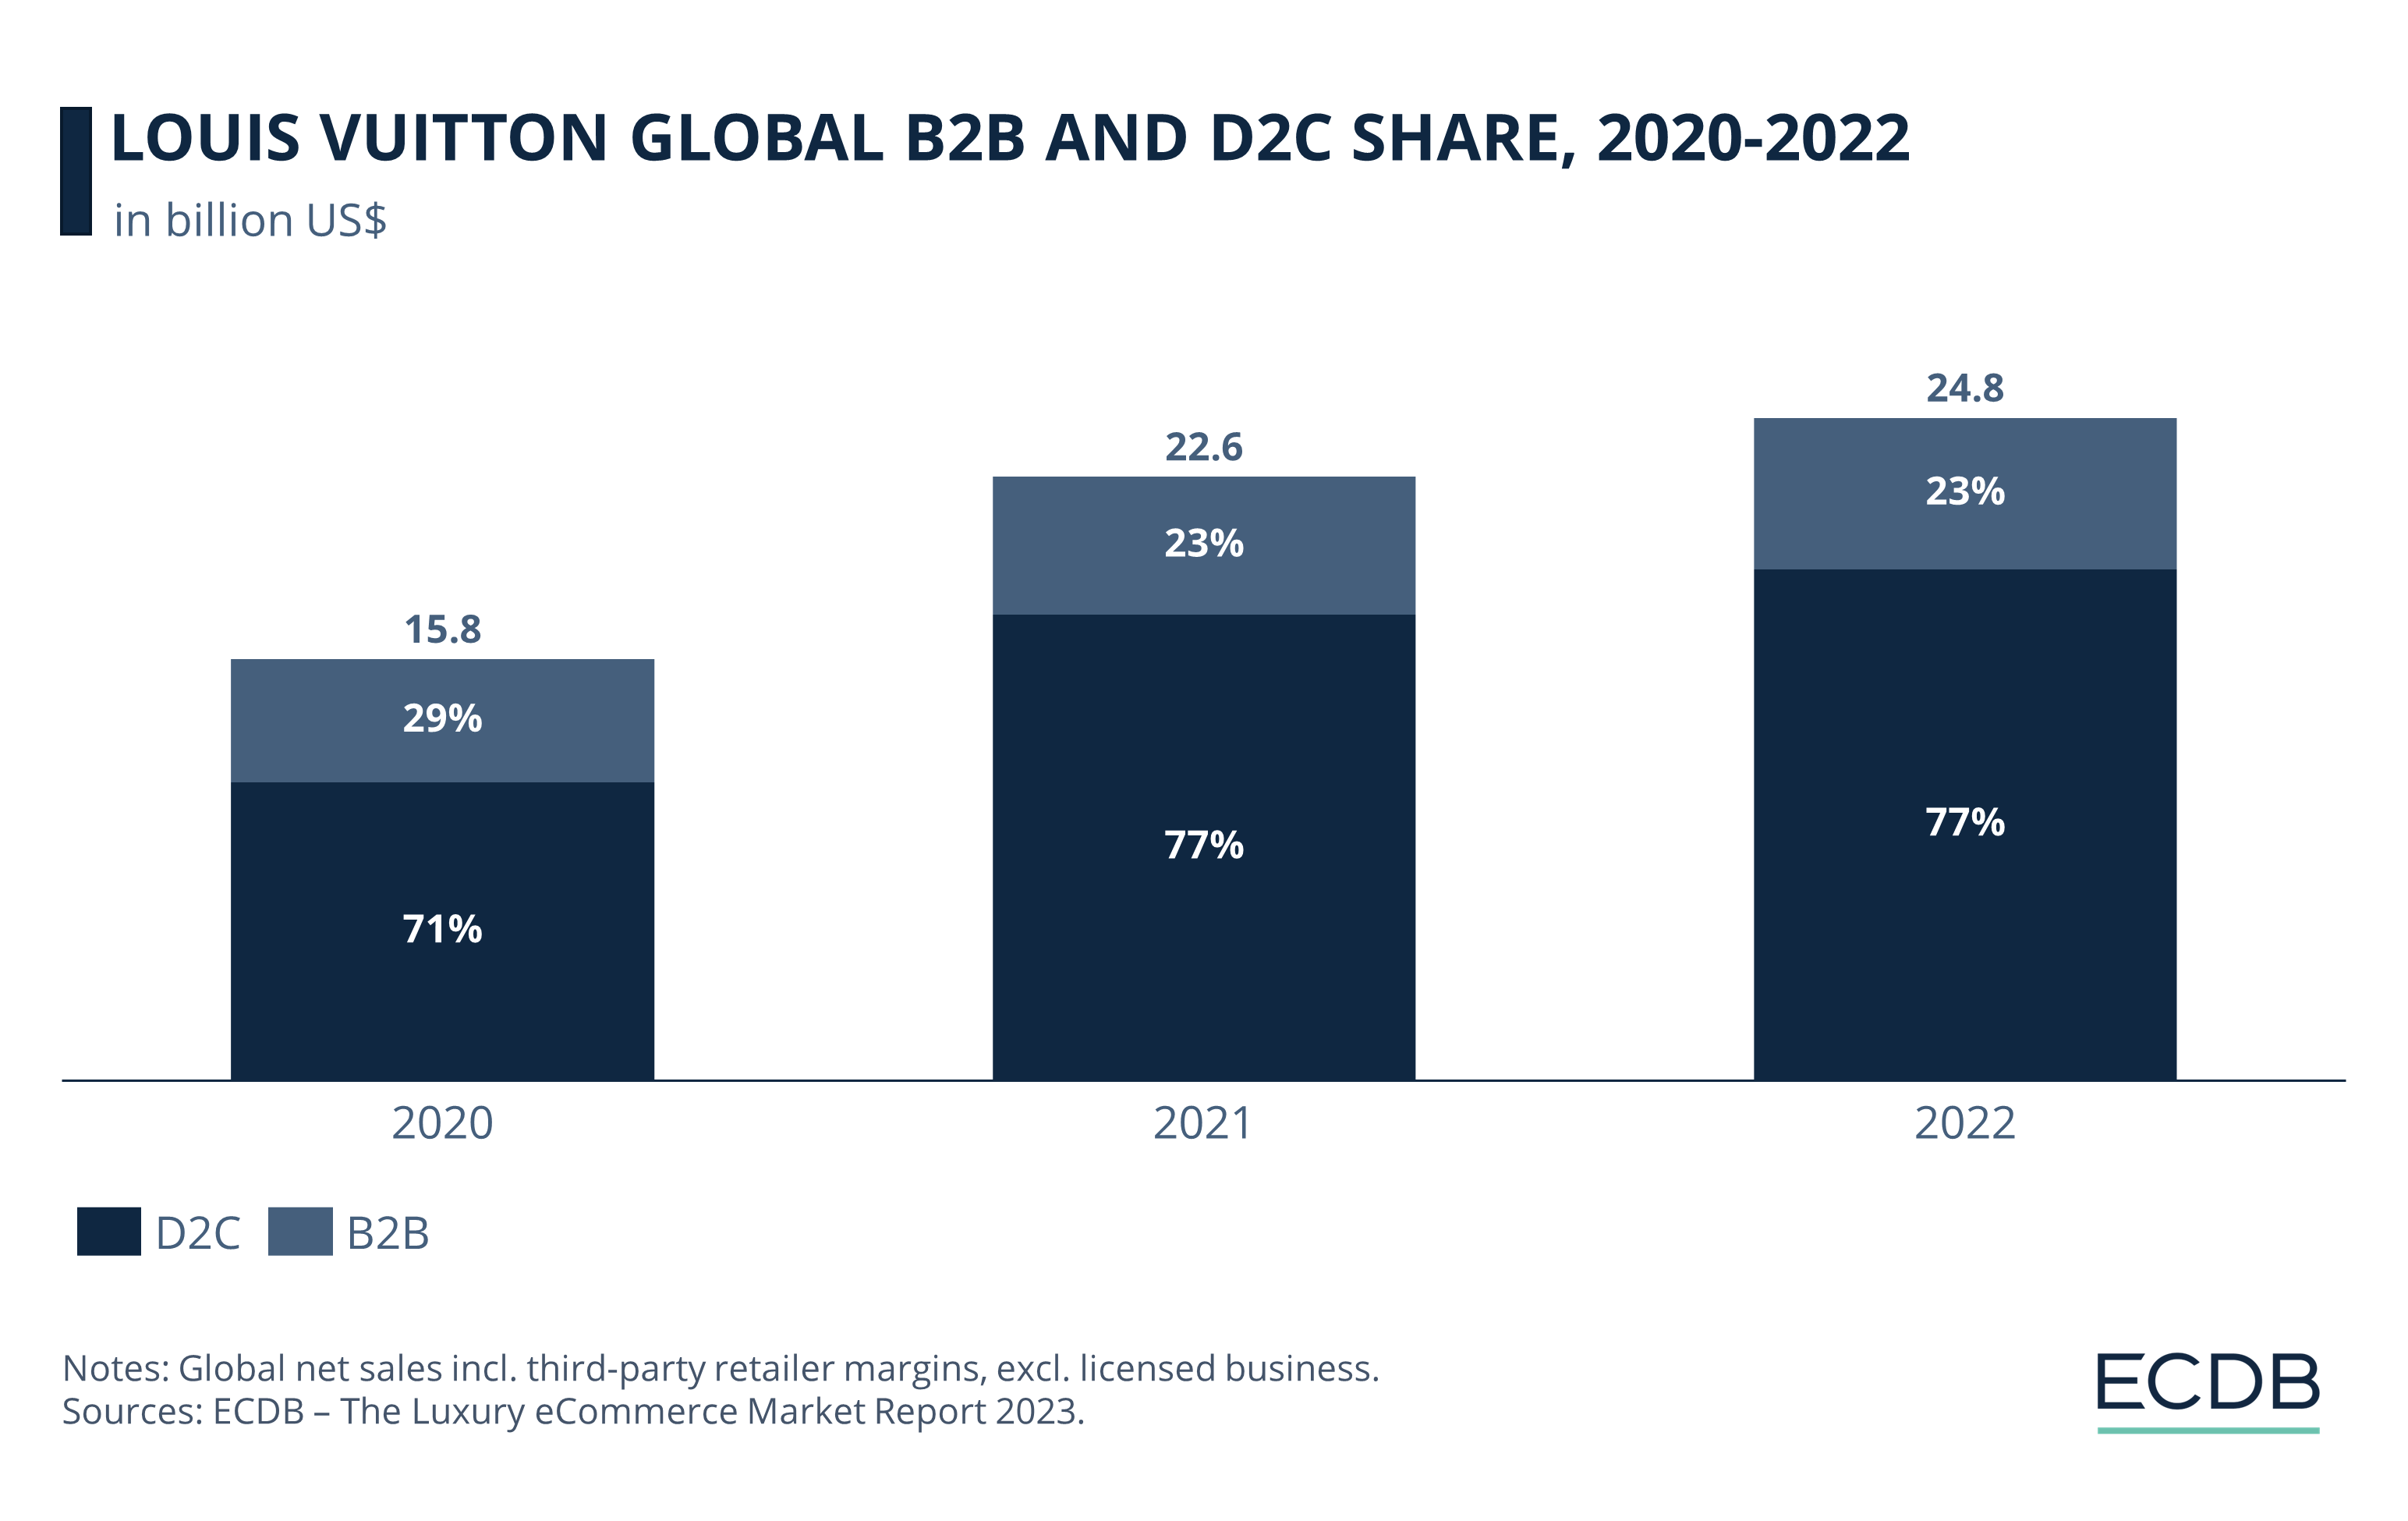 Louis Vuitton Global D2C and B2B Overall Net Sales, 2020-2022